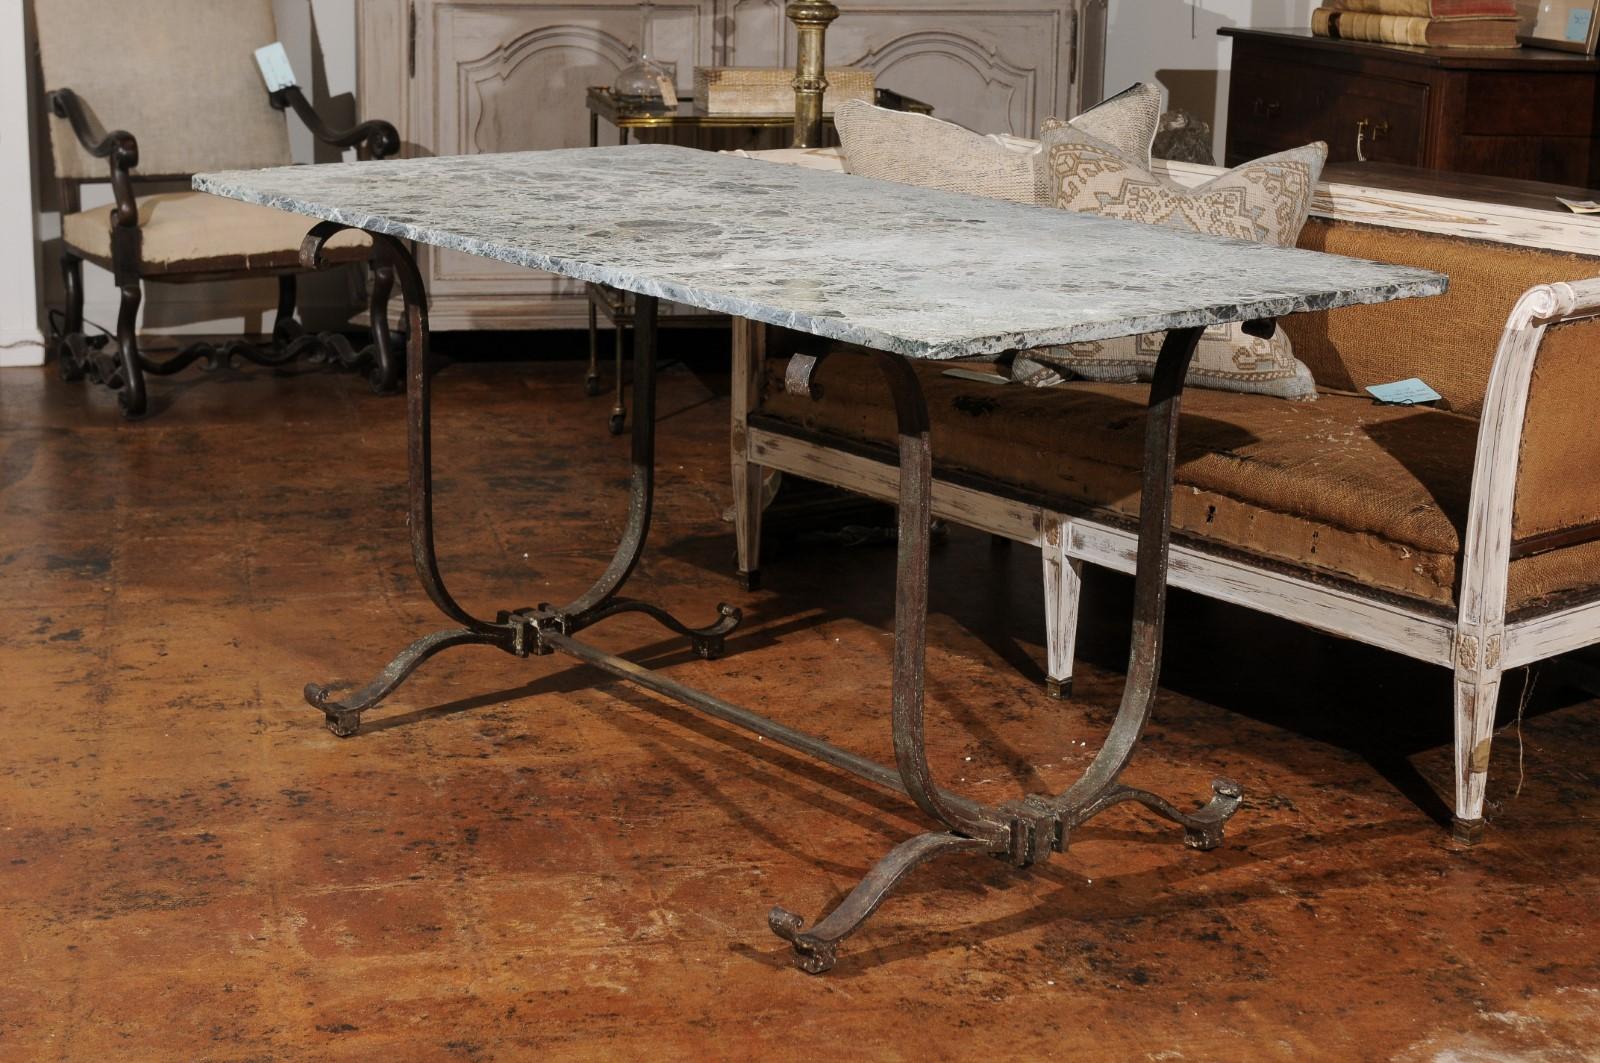 A vintage French wrought-iron garden table from the first half of the 20th century, with its original marble top. This French garden table features a rectangular marble top with rounded corners, sitting above an interesting wrought-iron base. The